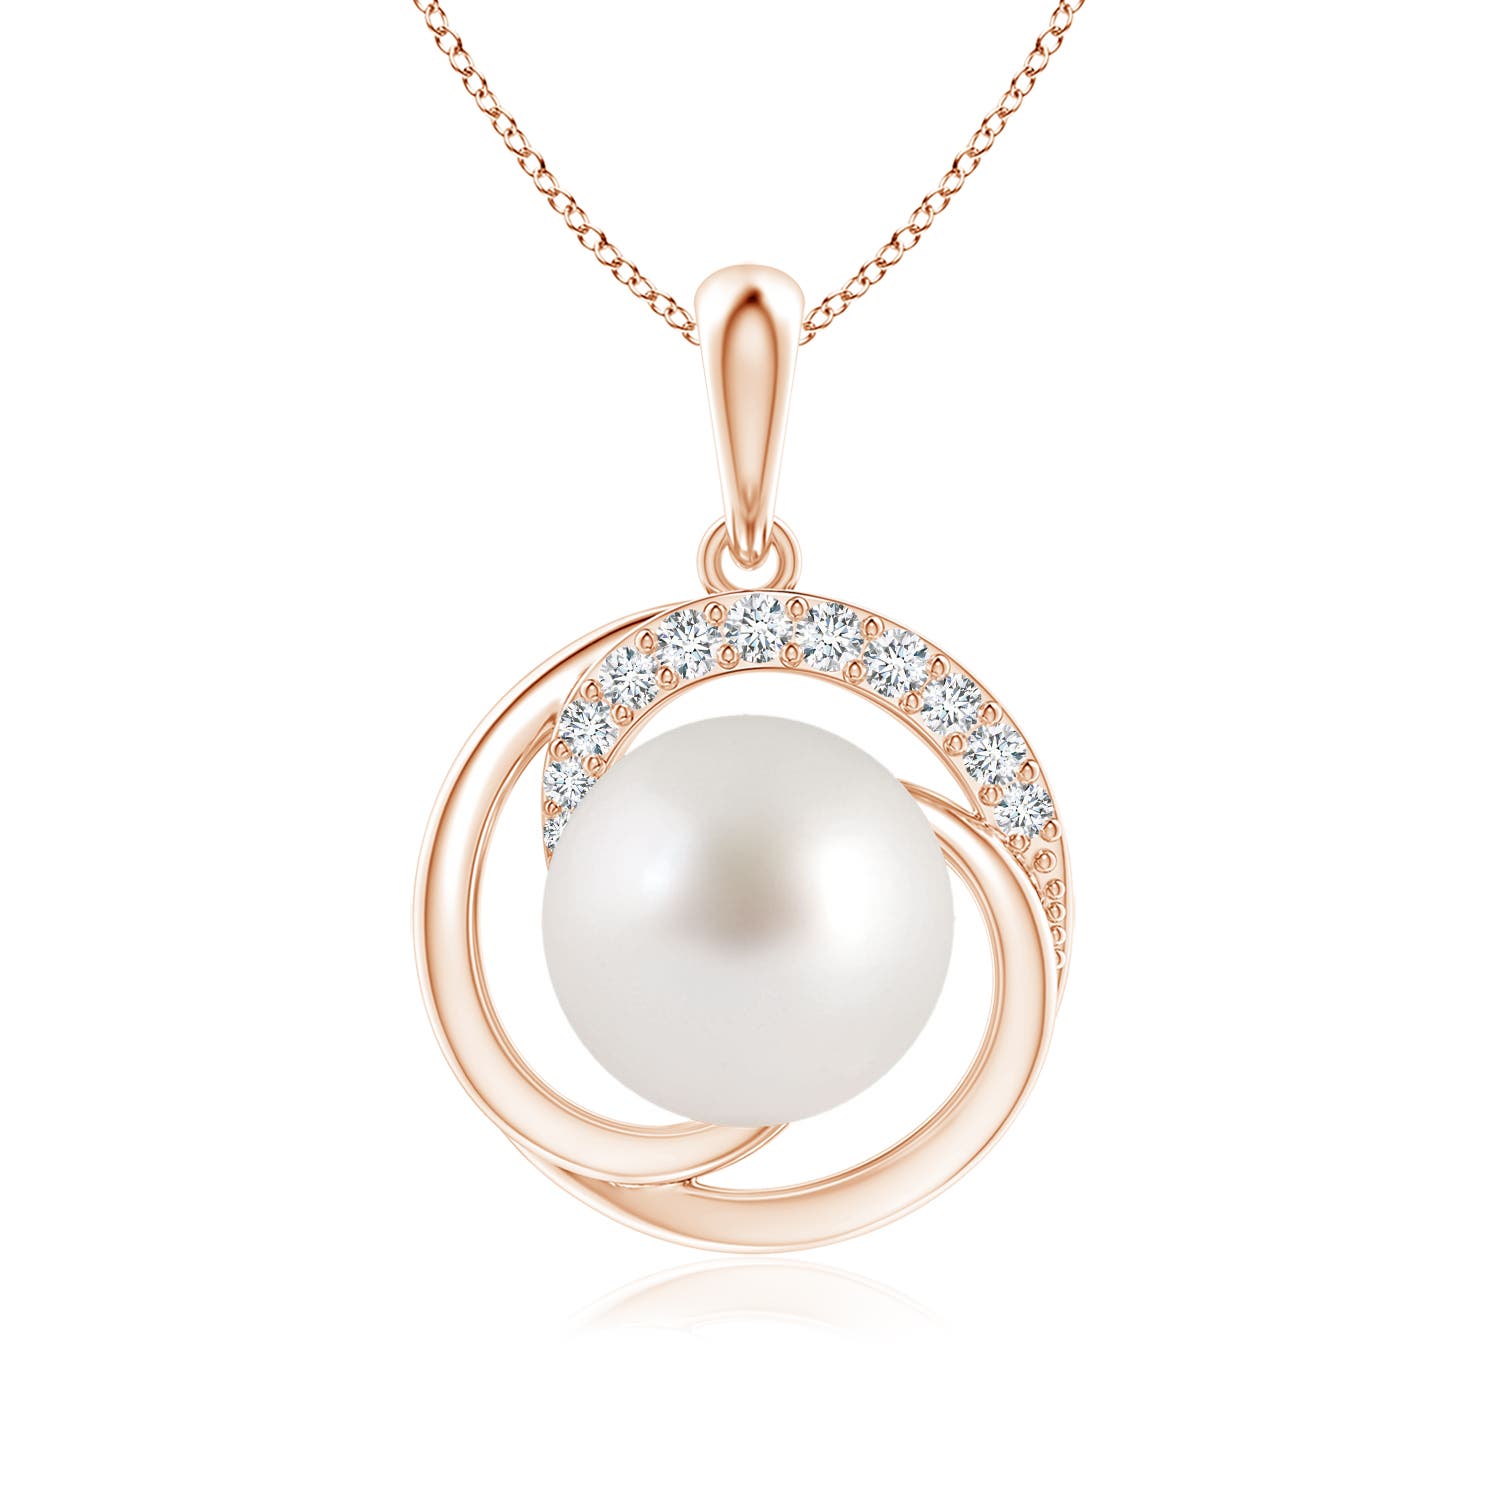 AAA - South Sea Cultured Pearl / 5.36 CT / 14 KT Rose Gold